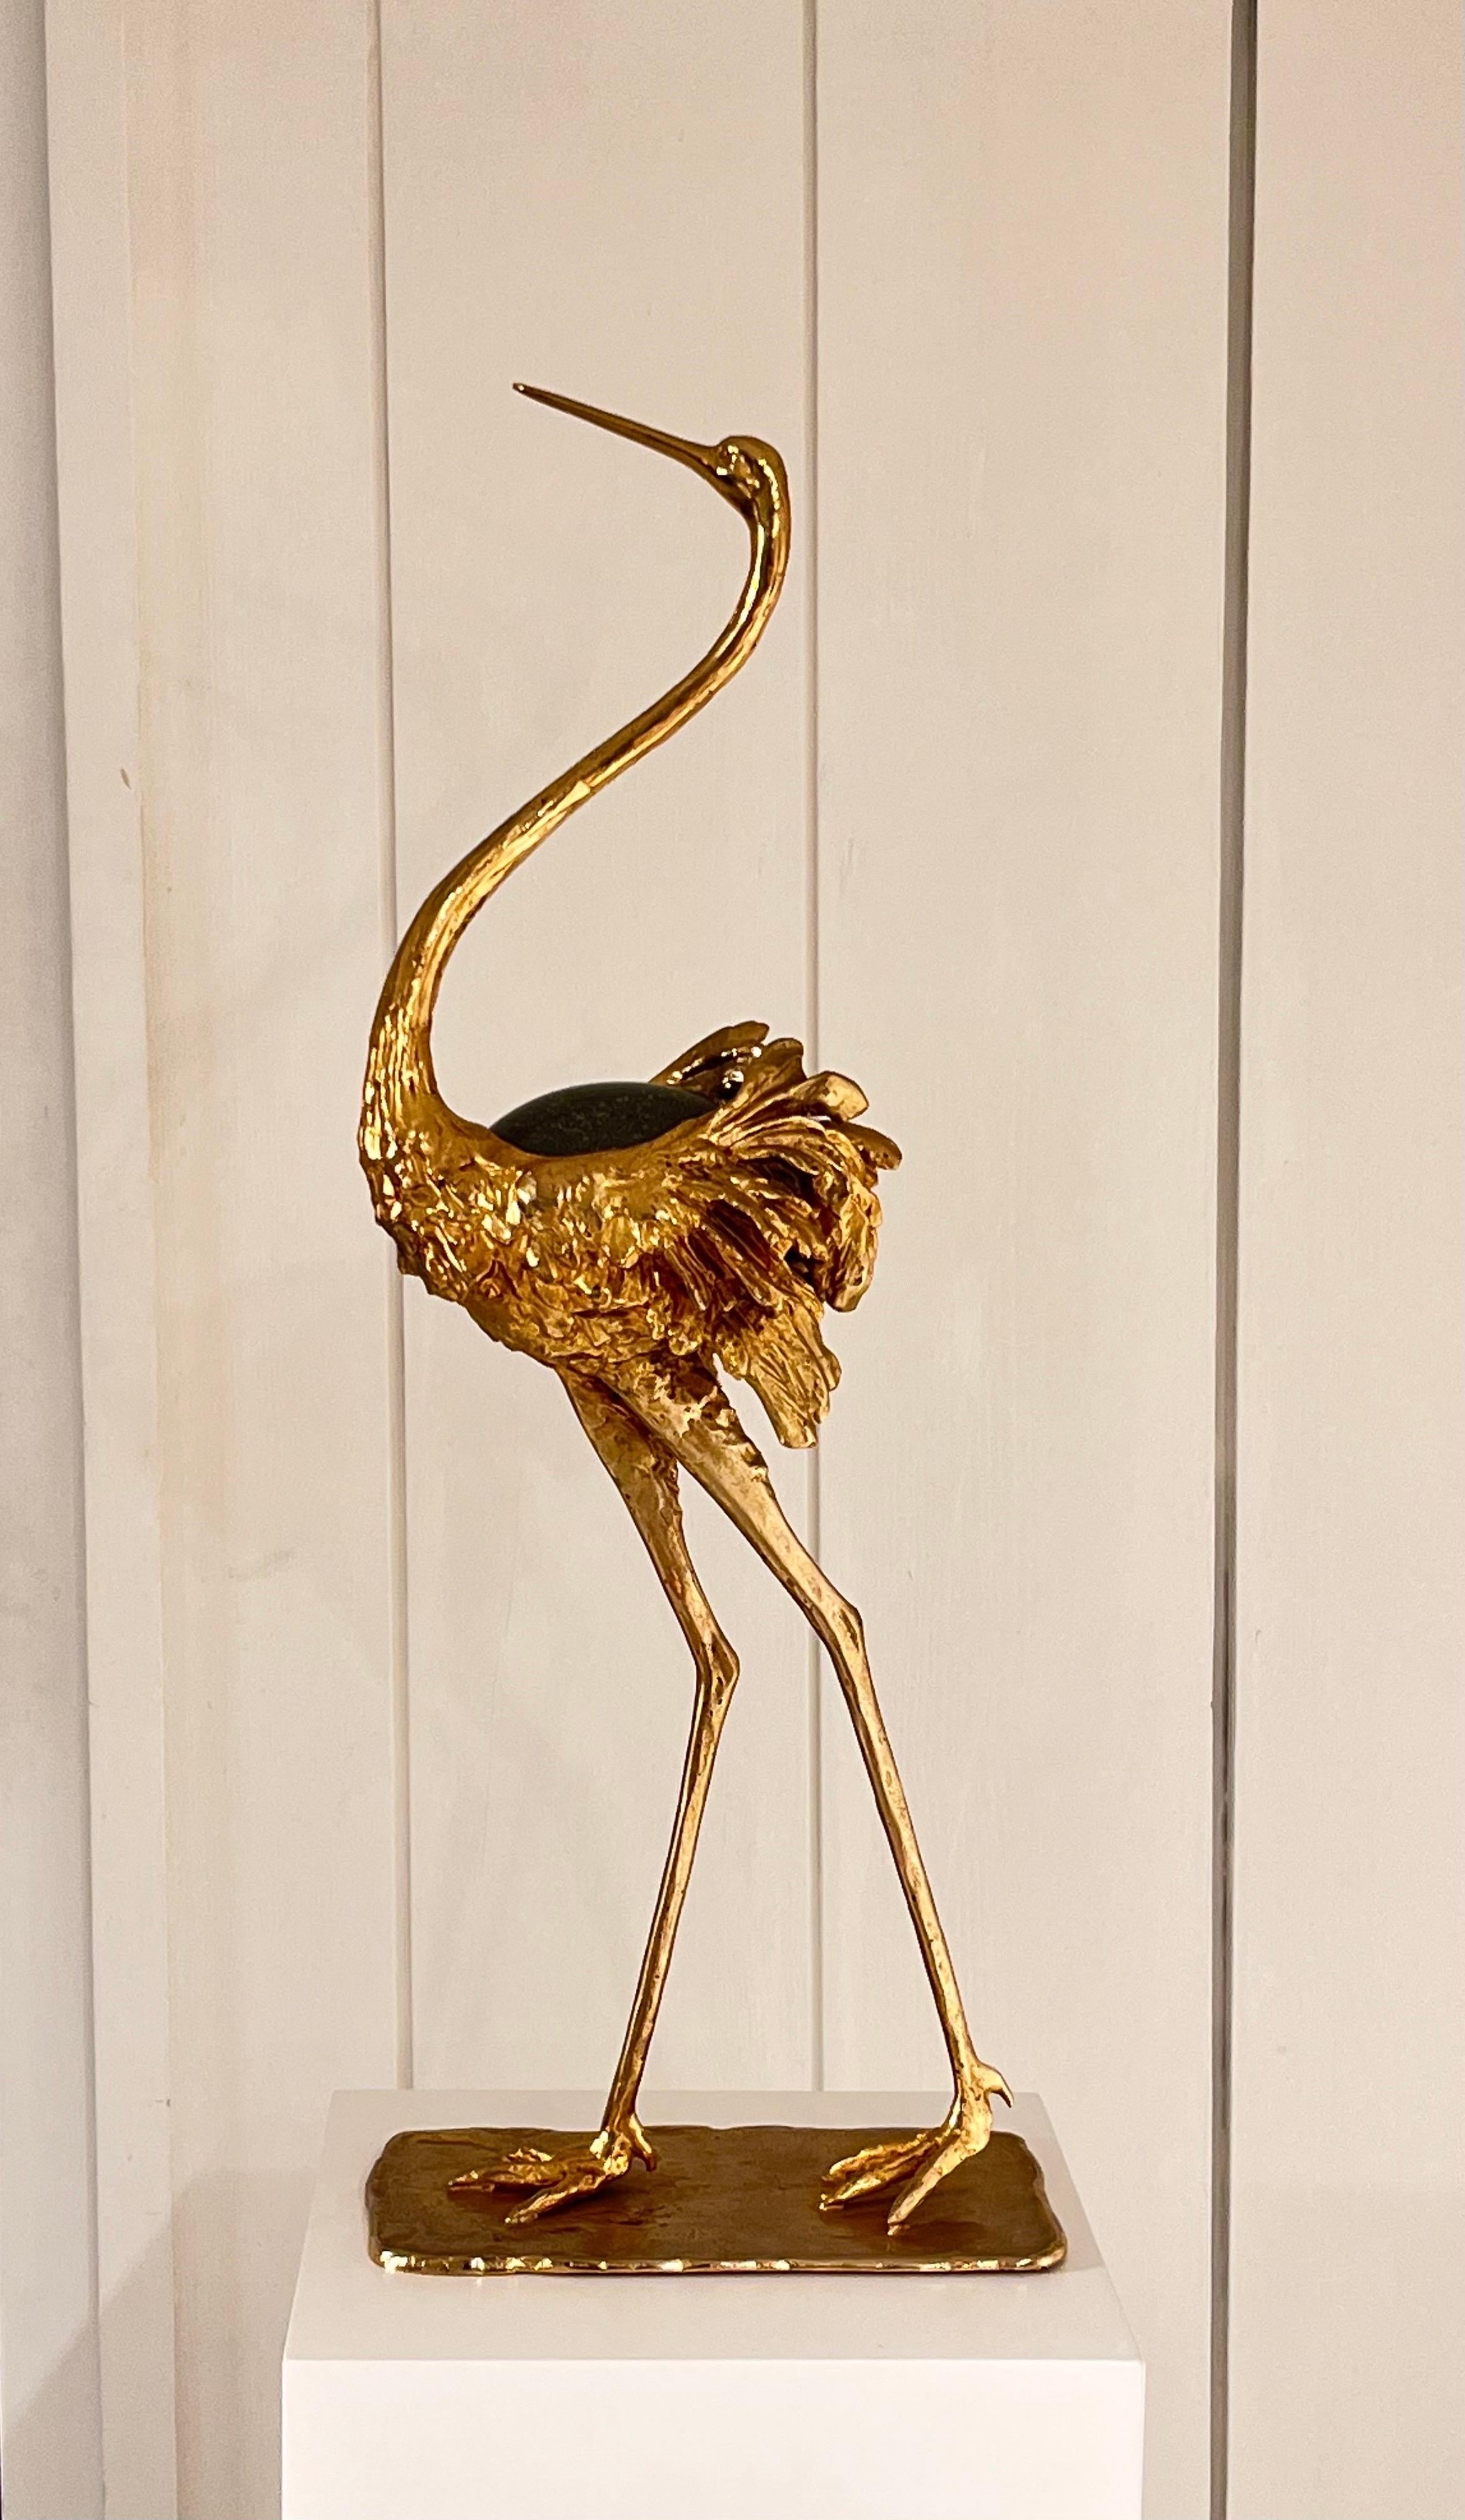 Airone sculpture
Signed by the artist on the base
Gild bronze and Barovier & Toso blown glass
Executed circa 1973-1974.